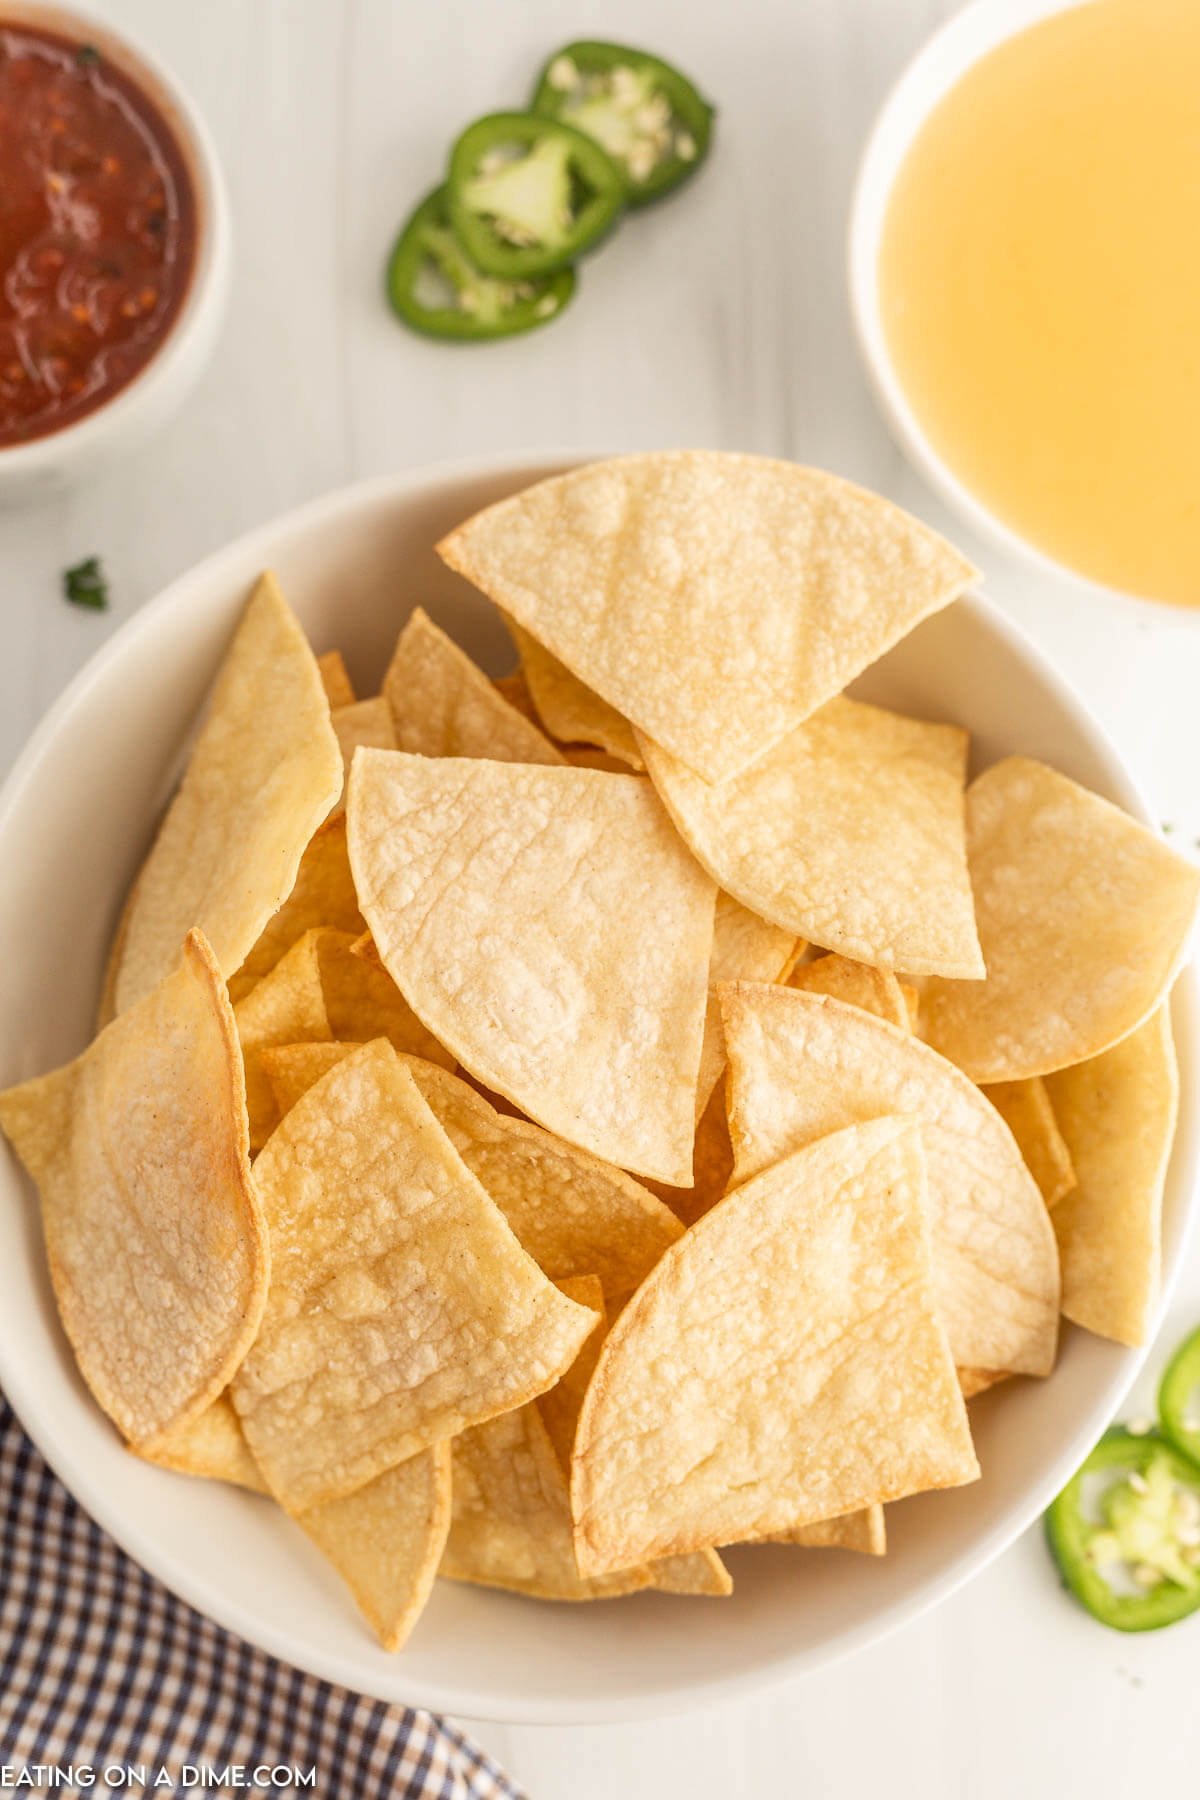 Homemade Air Fryer Tortilla Chips Recipe - Eating on a Dime